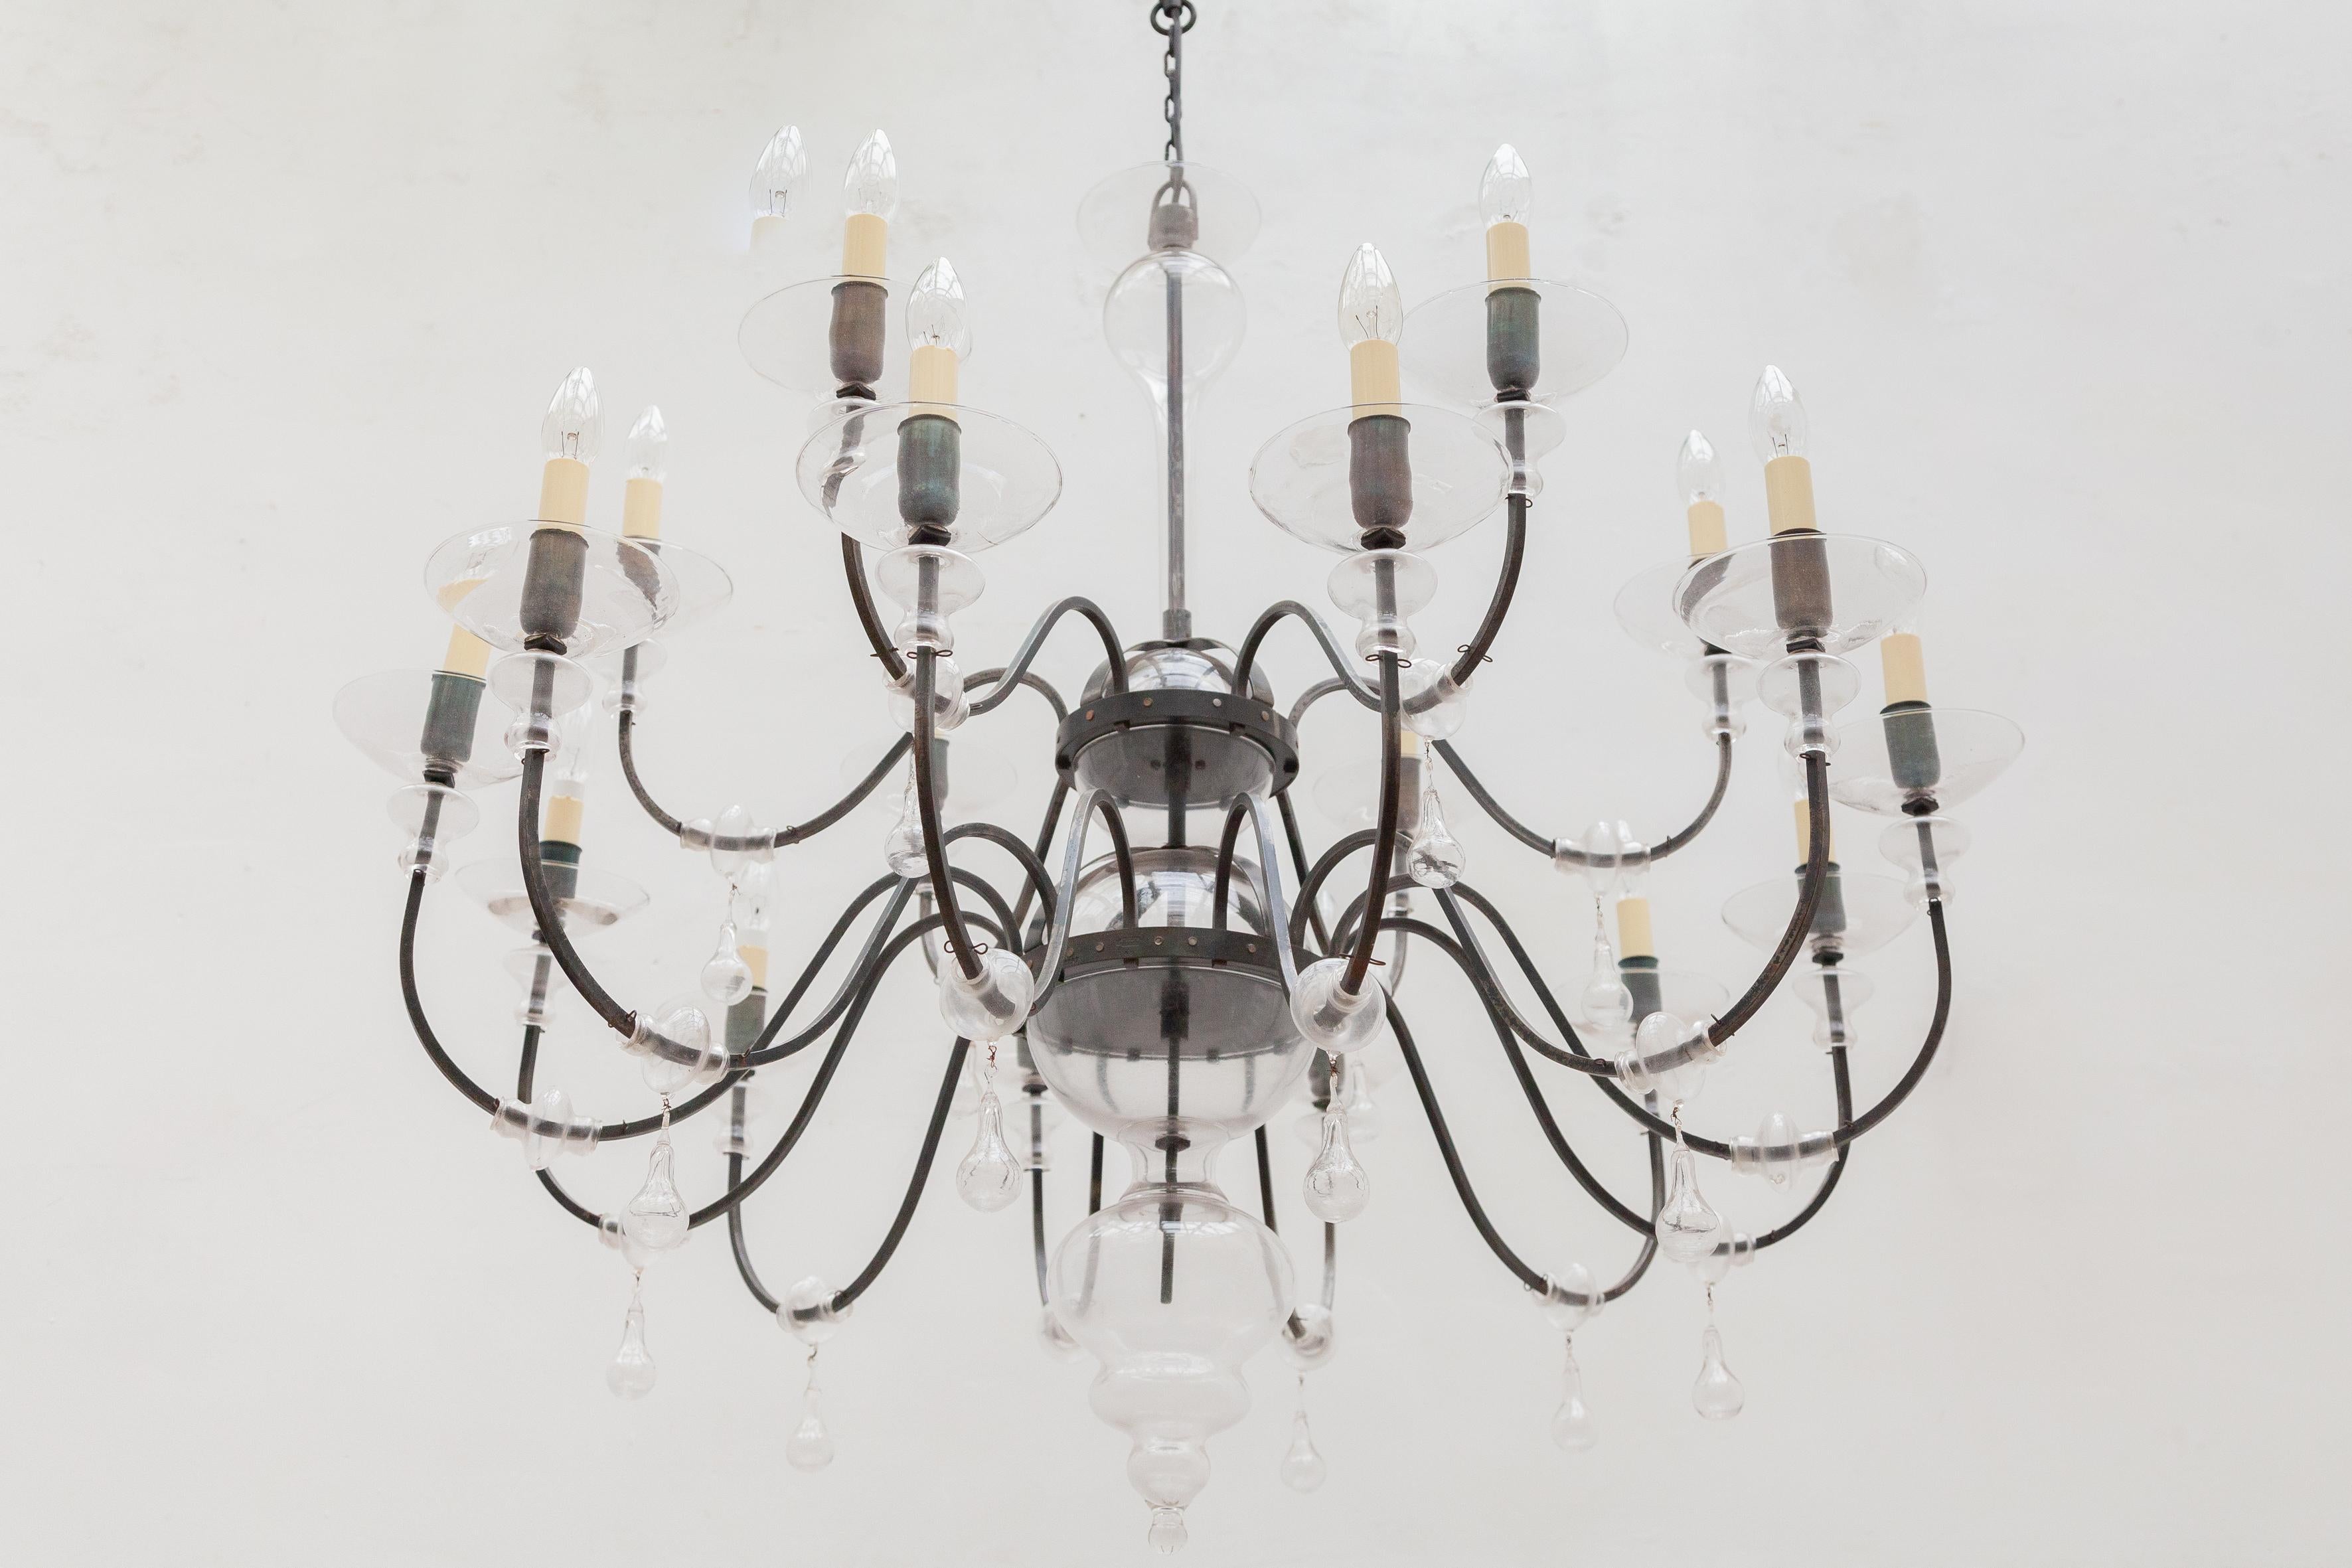 German Large Brutalist Classic Wrought Iron Chandelier Designed by Günther Lambert